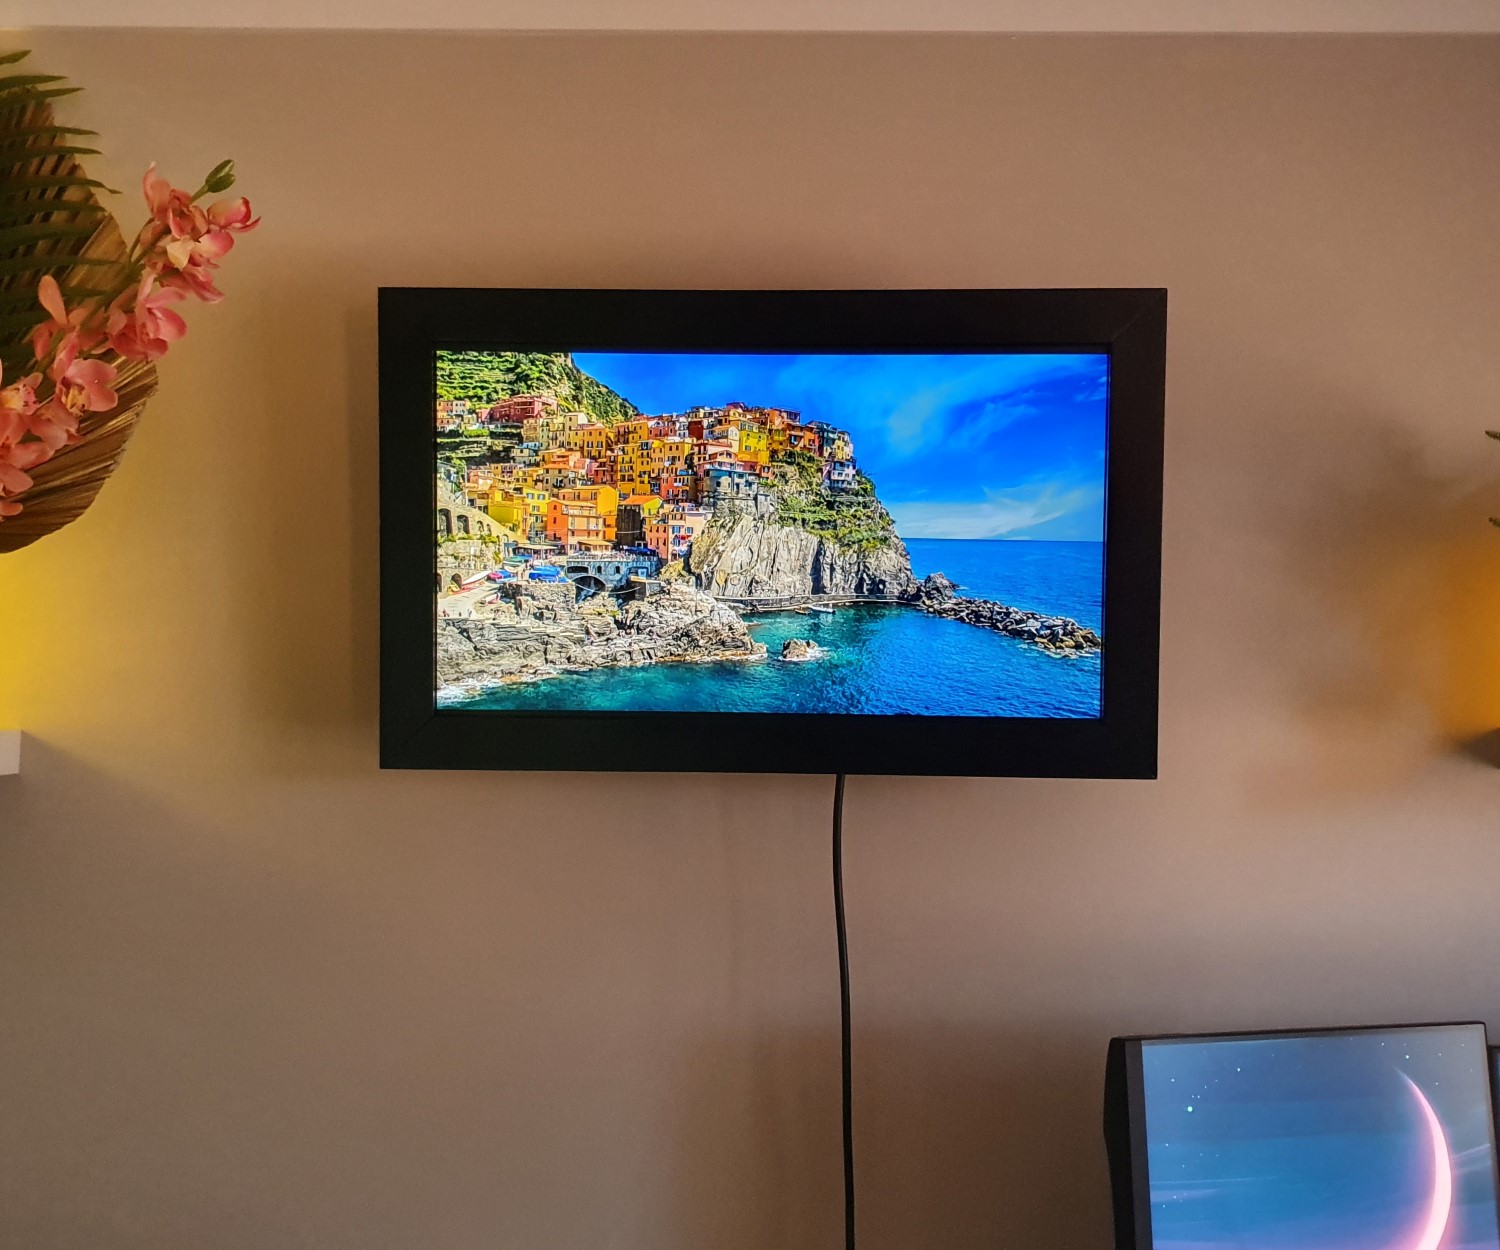 How To Turn A Monitor Into A Digital Picture Frame